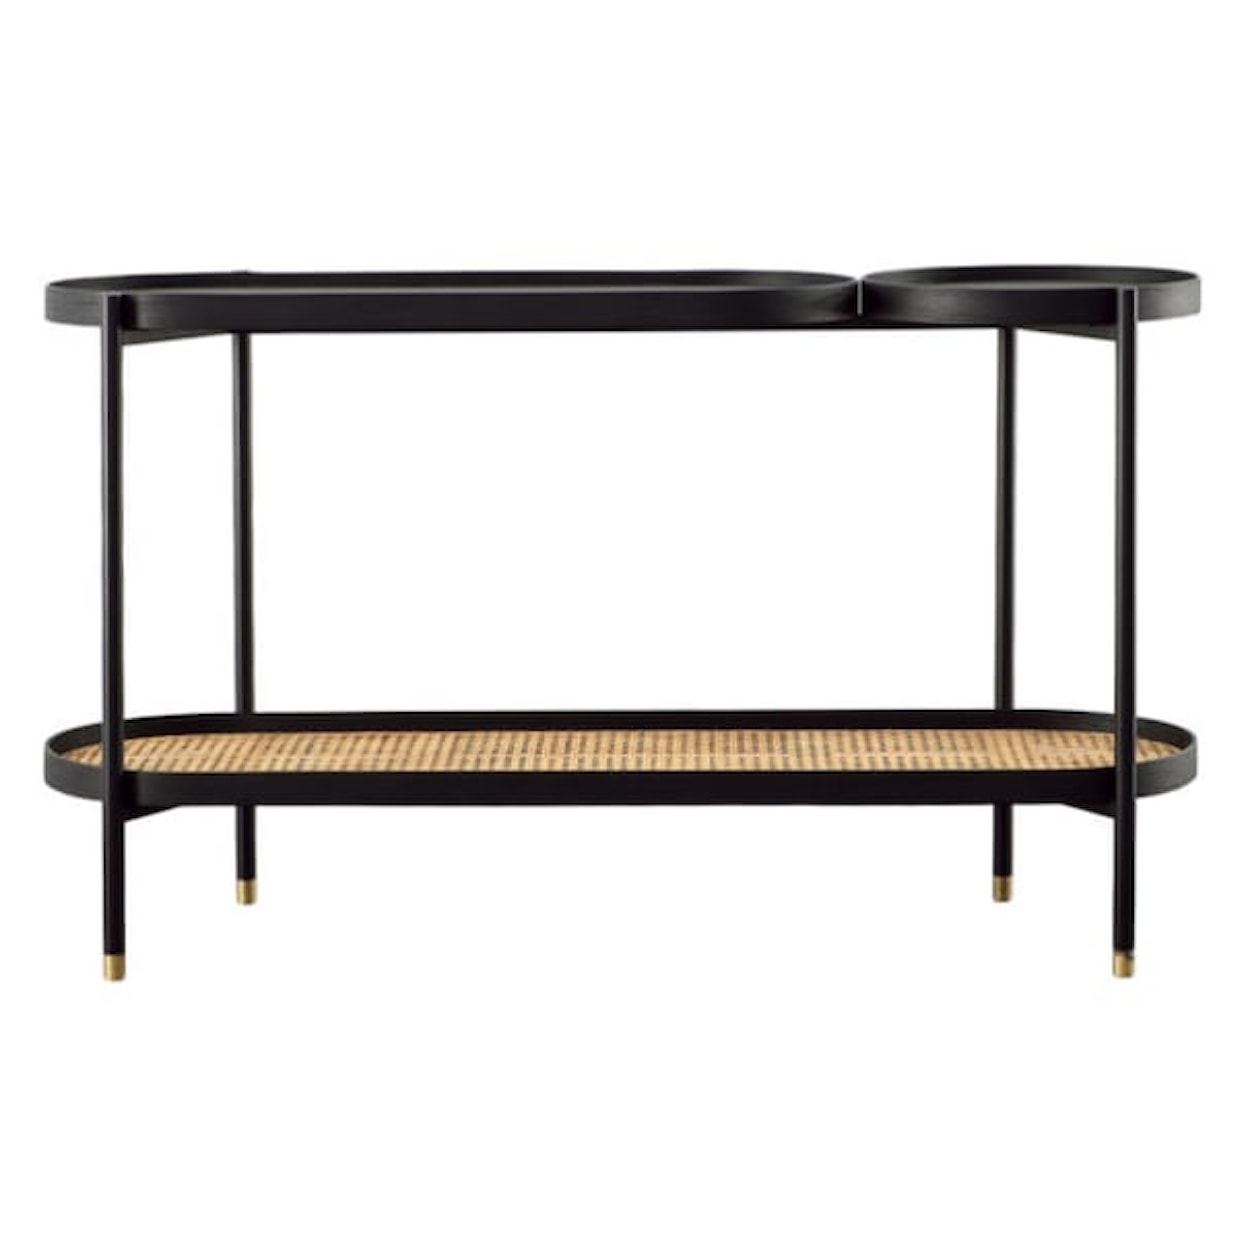 Dovetail Furniture Dovetail Accessories Petras Console Table